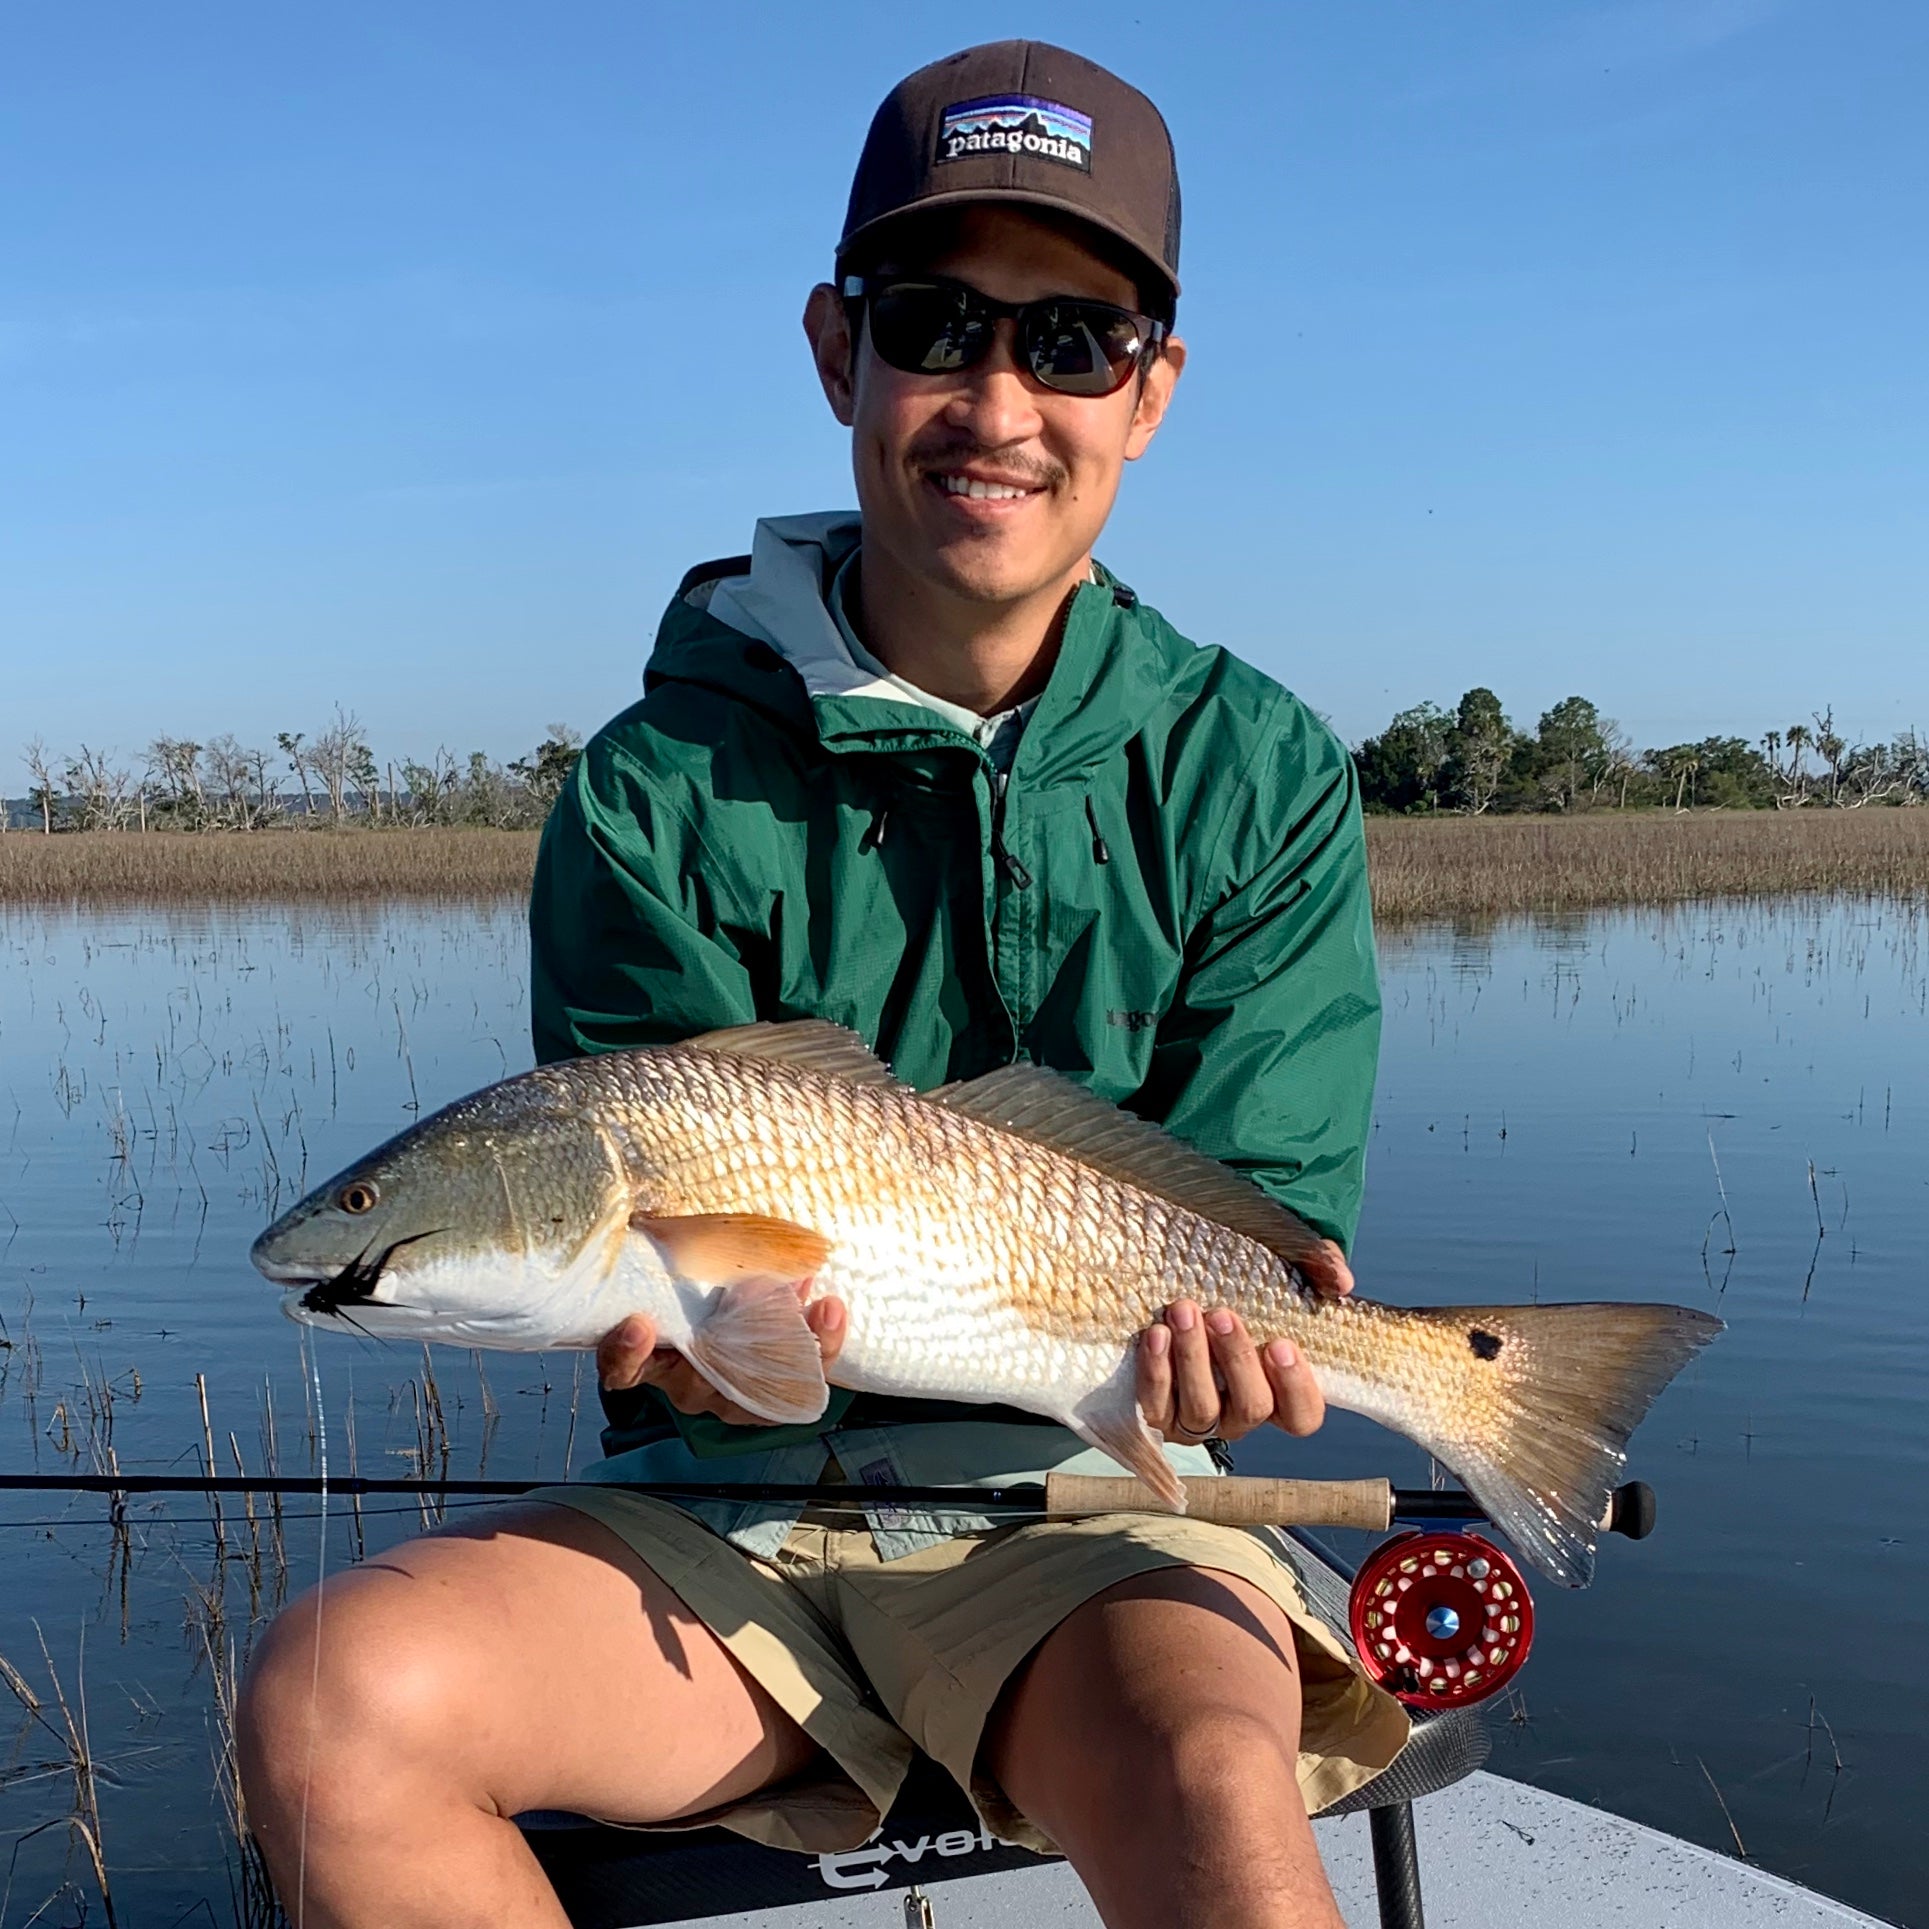 Tailing Redfish On The Fly!